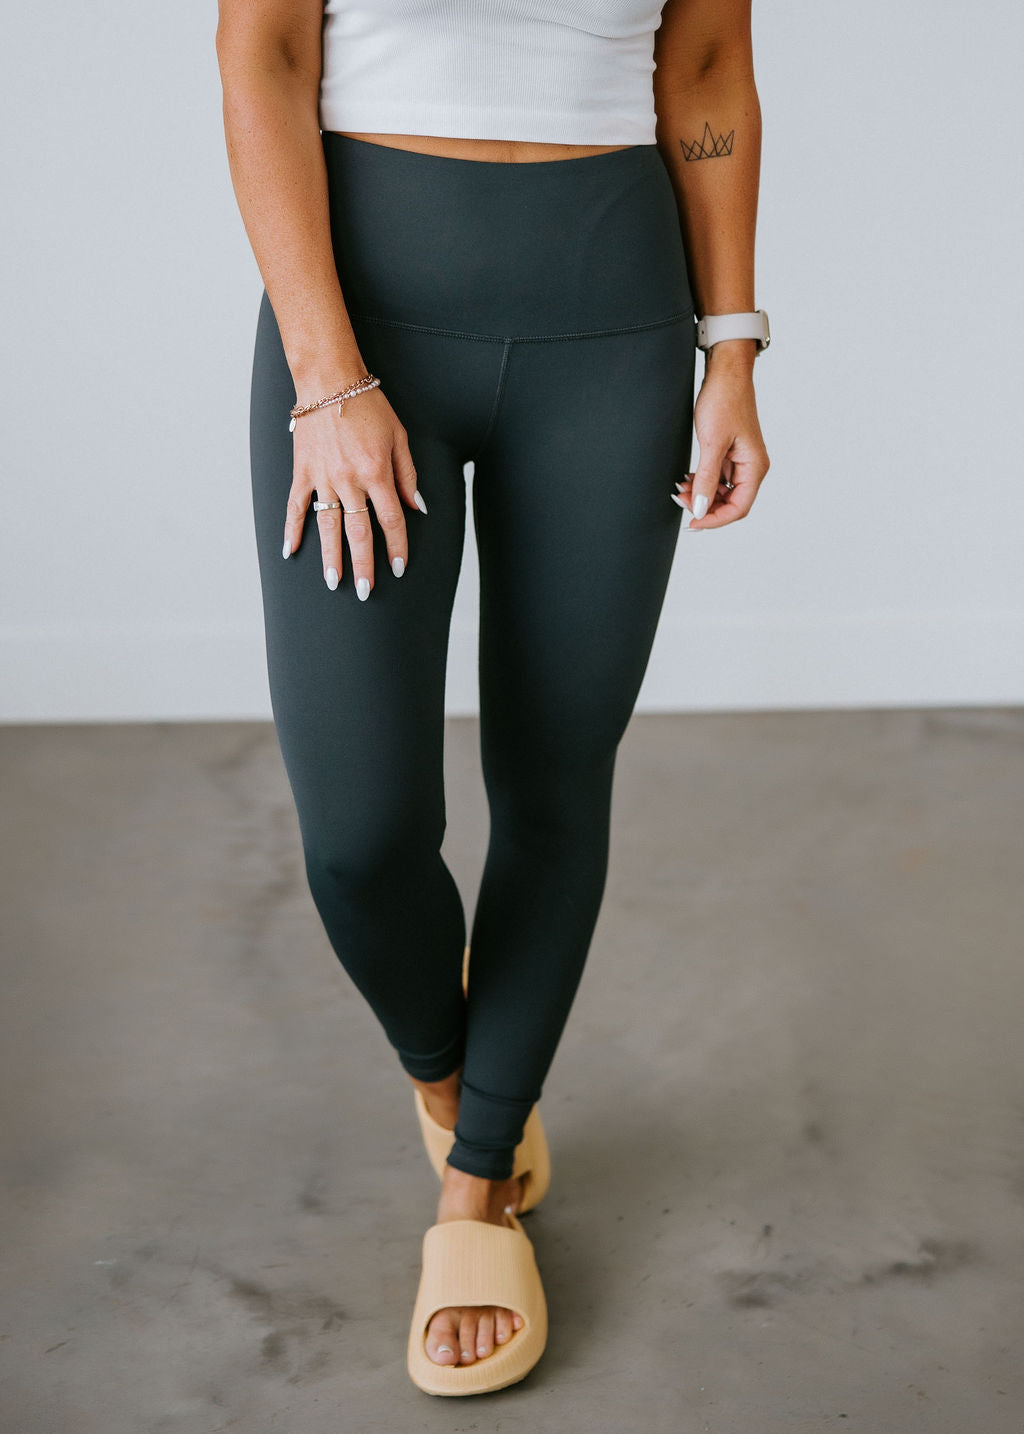 DON'T MISS OUT! Our Langford Leggings just restocked in this